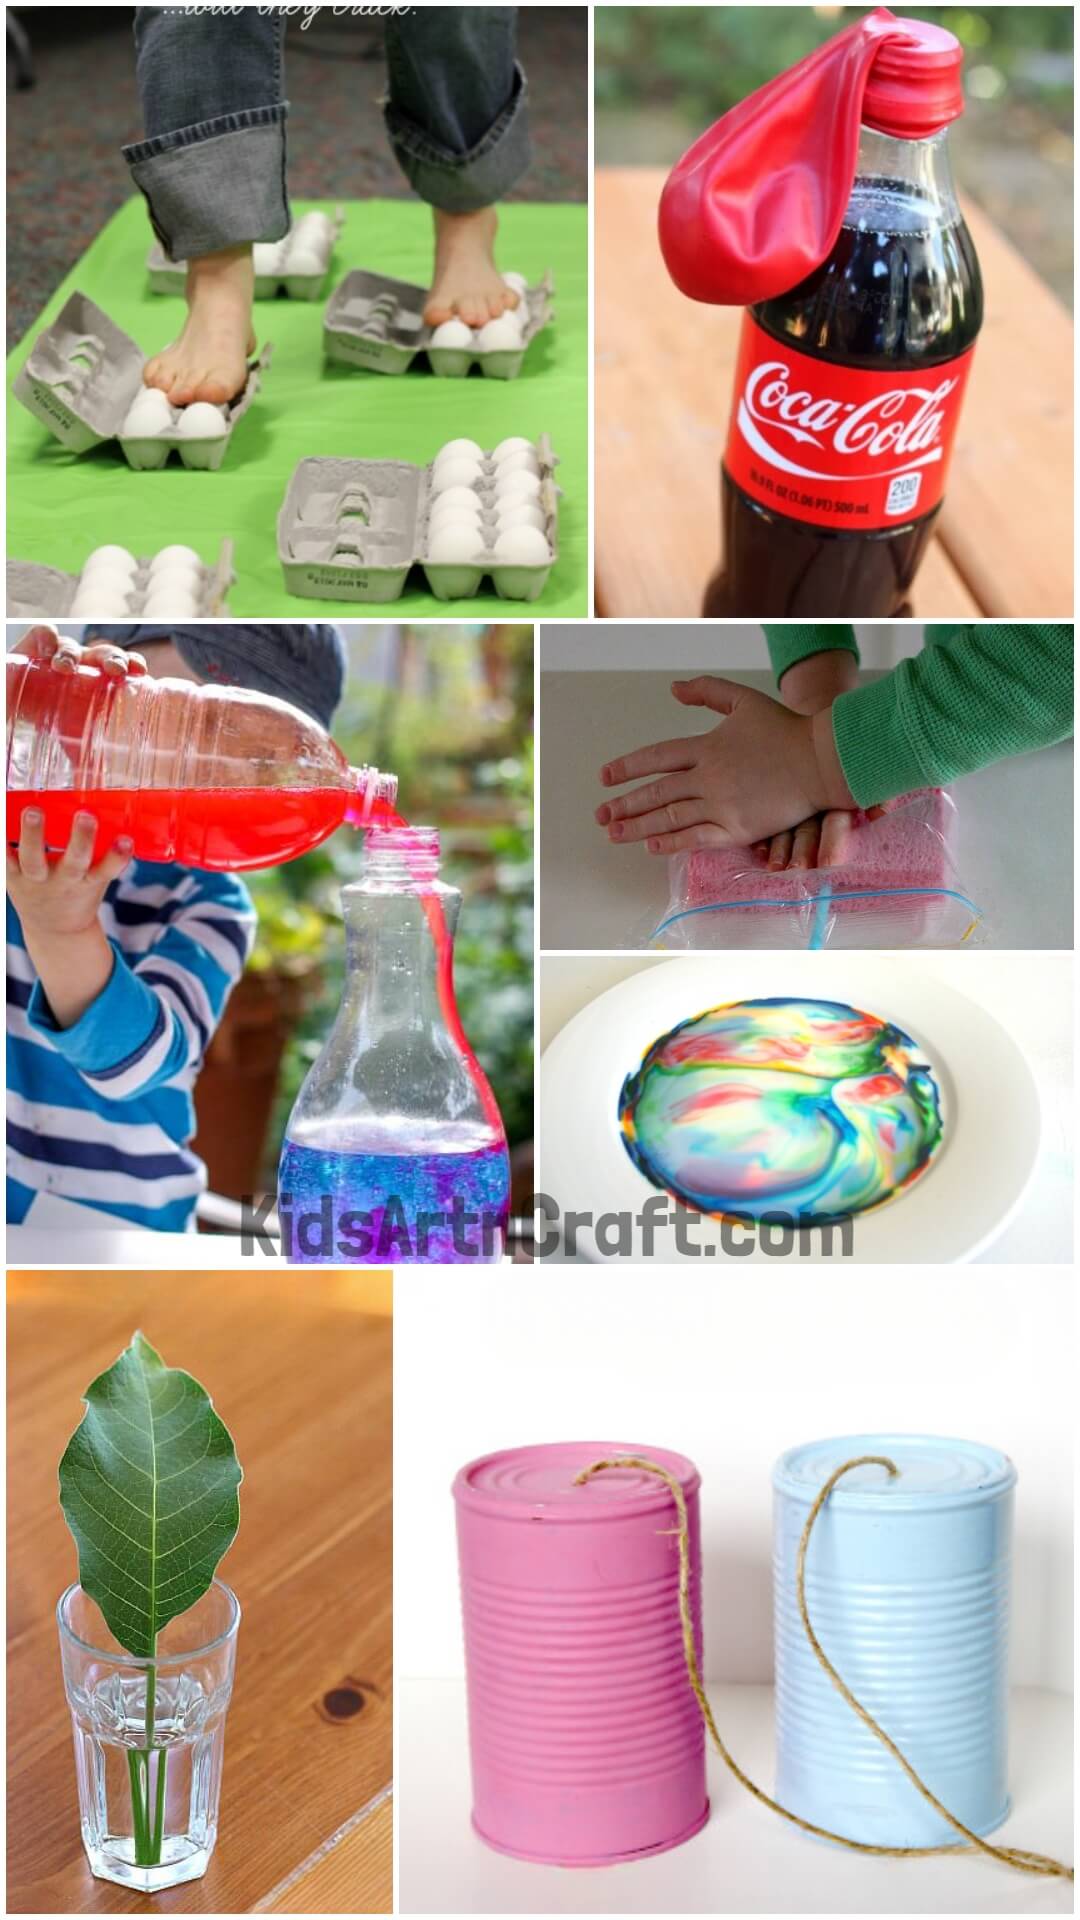 10 Simple Science Experiments for 3-5 Year Olds